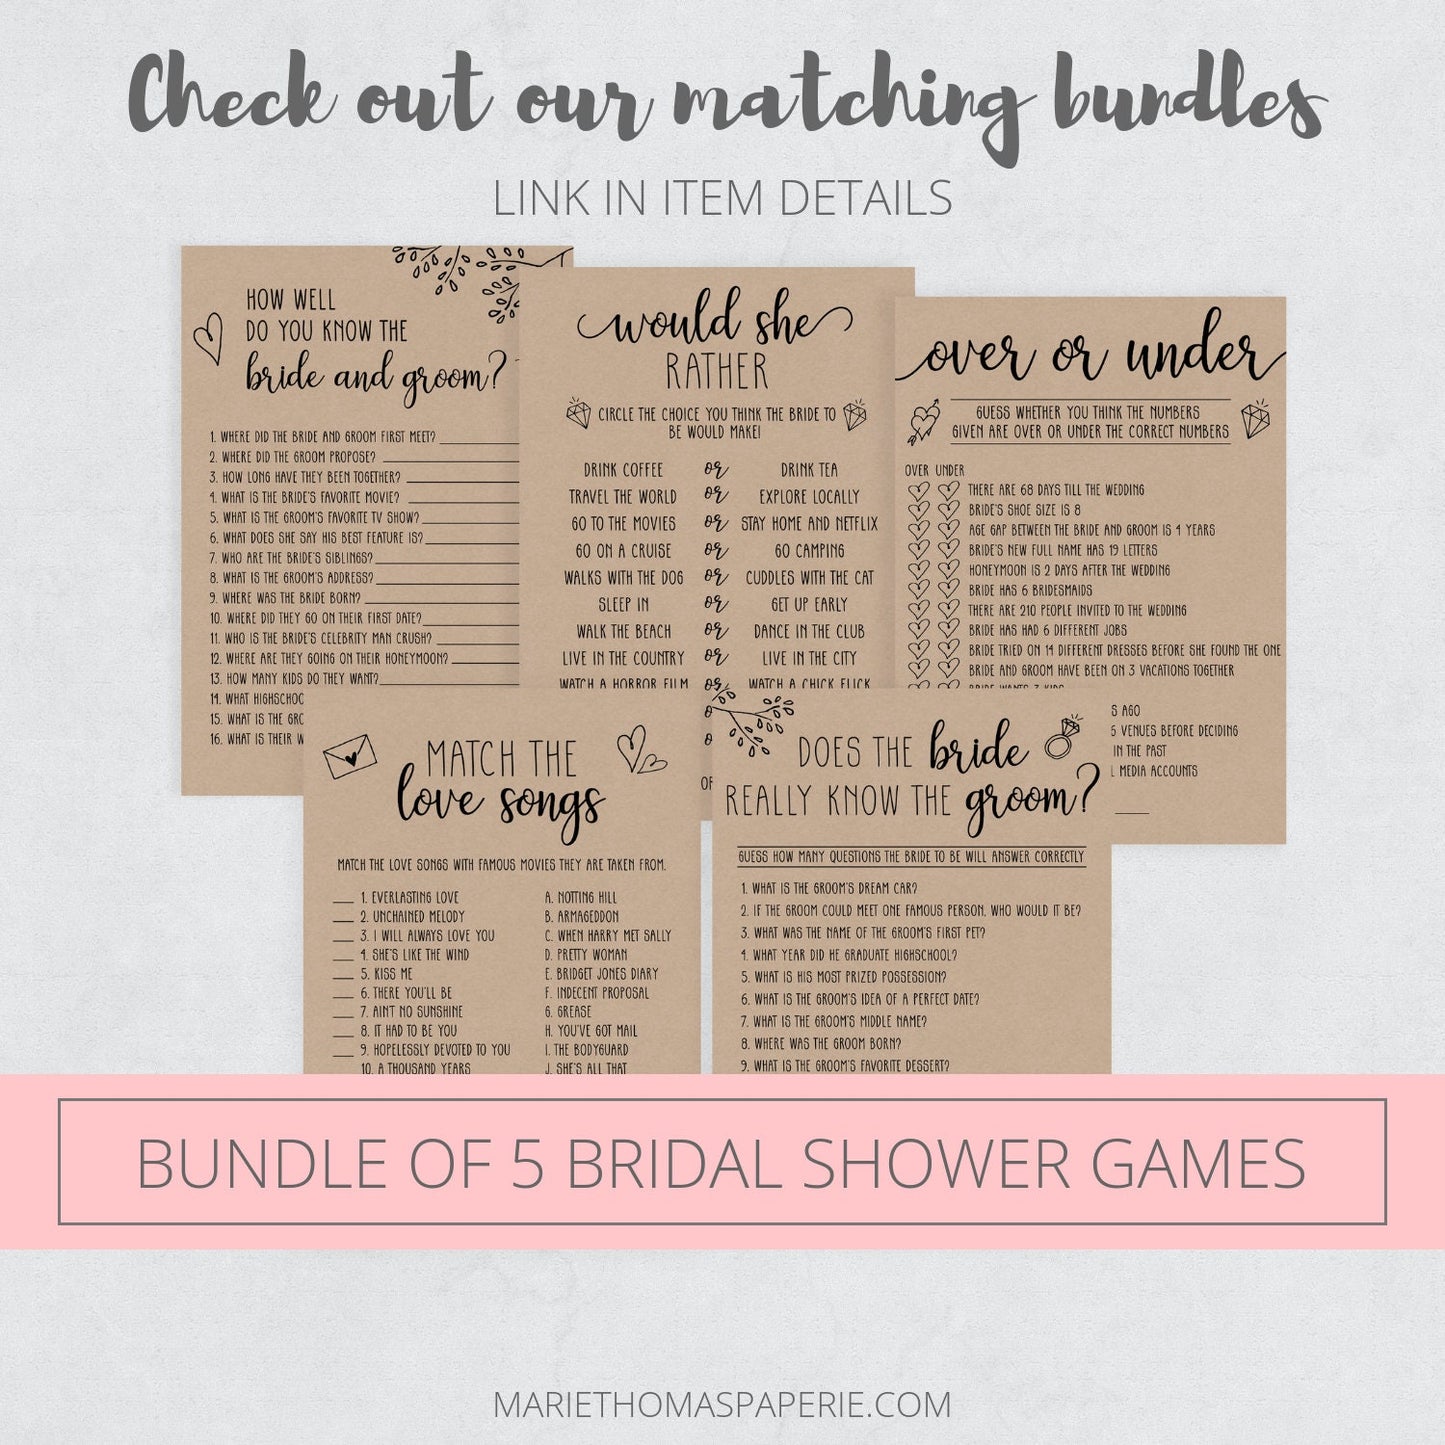 Editable Advice for the Bride Bridal Shower Games Rustic Kraft Paper & Black and White Template